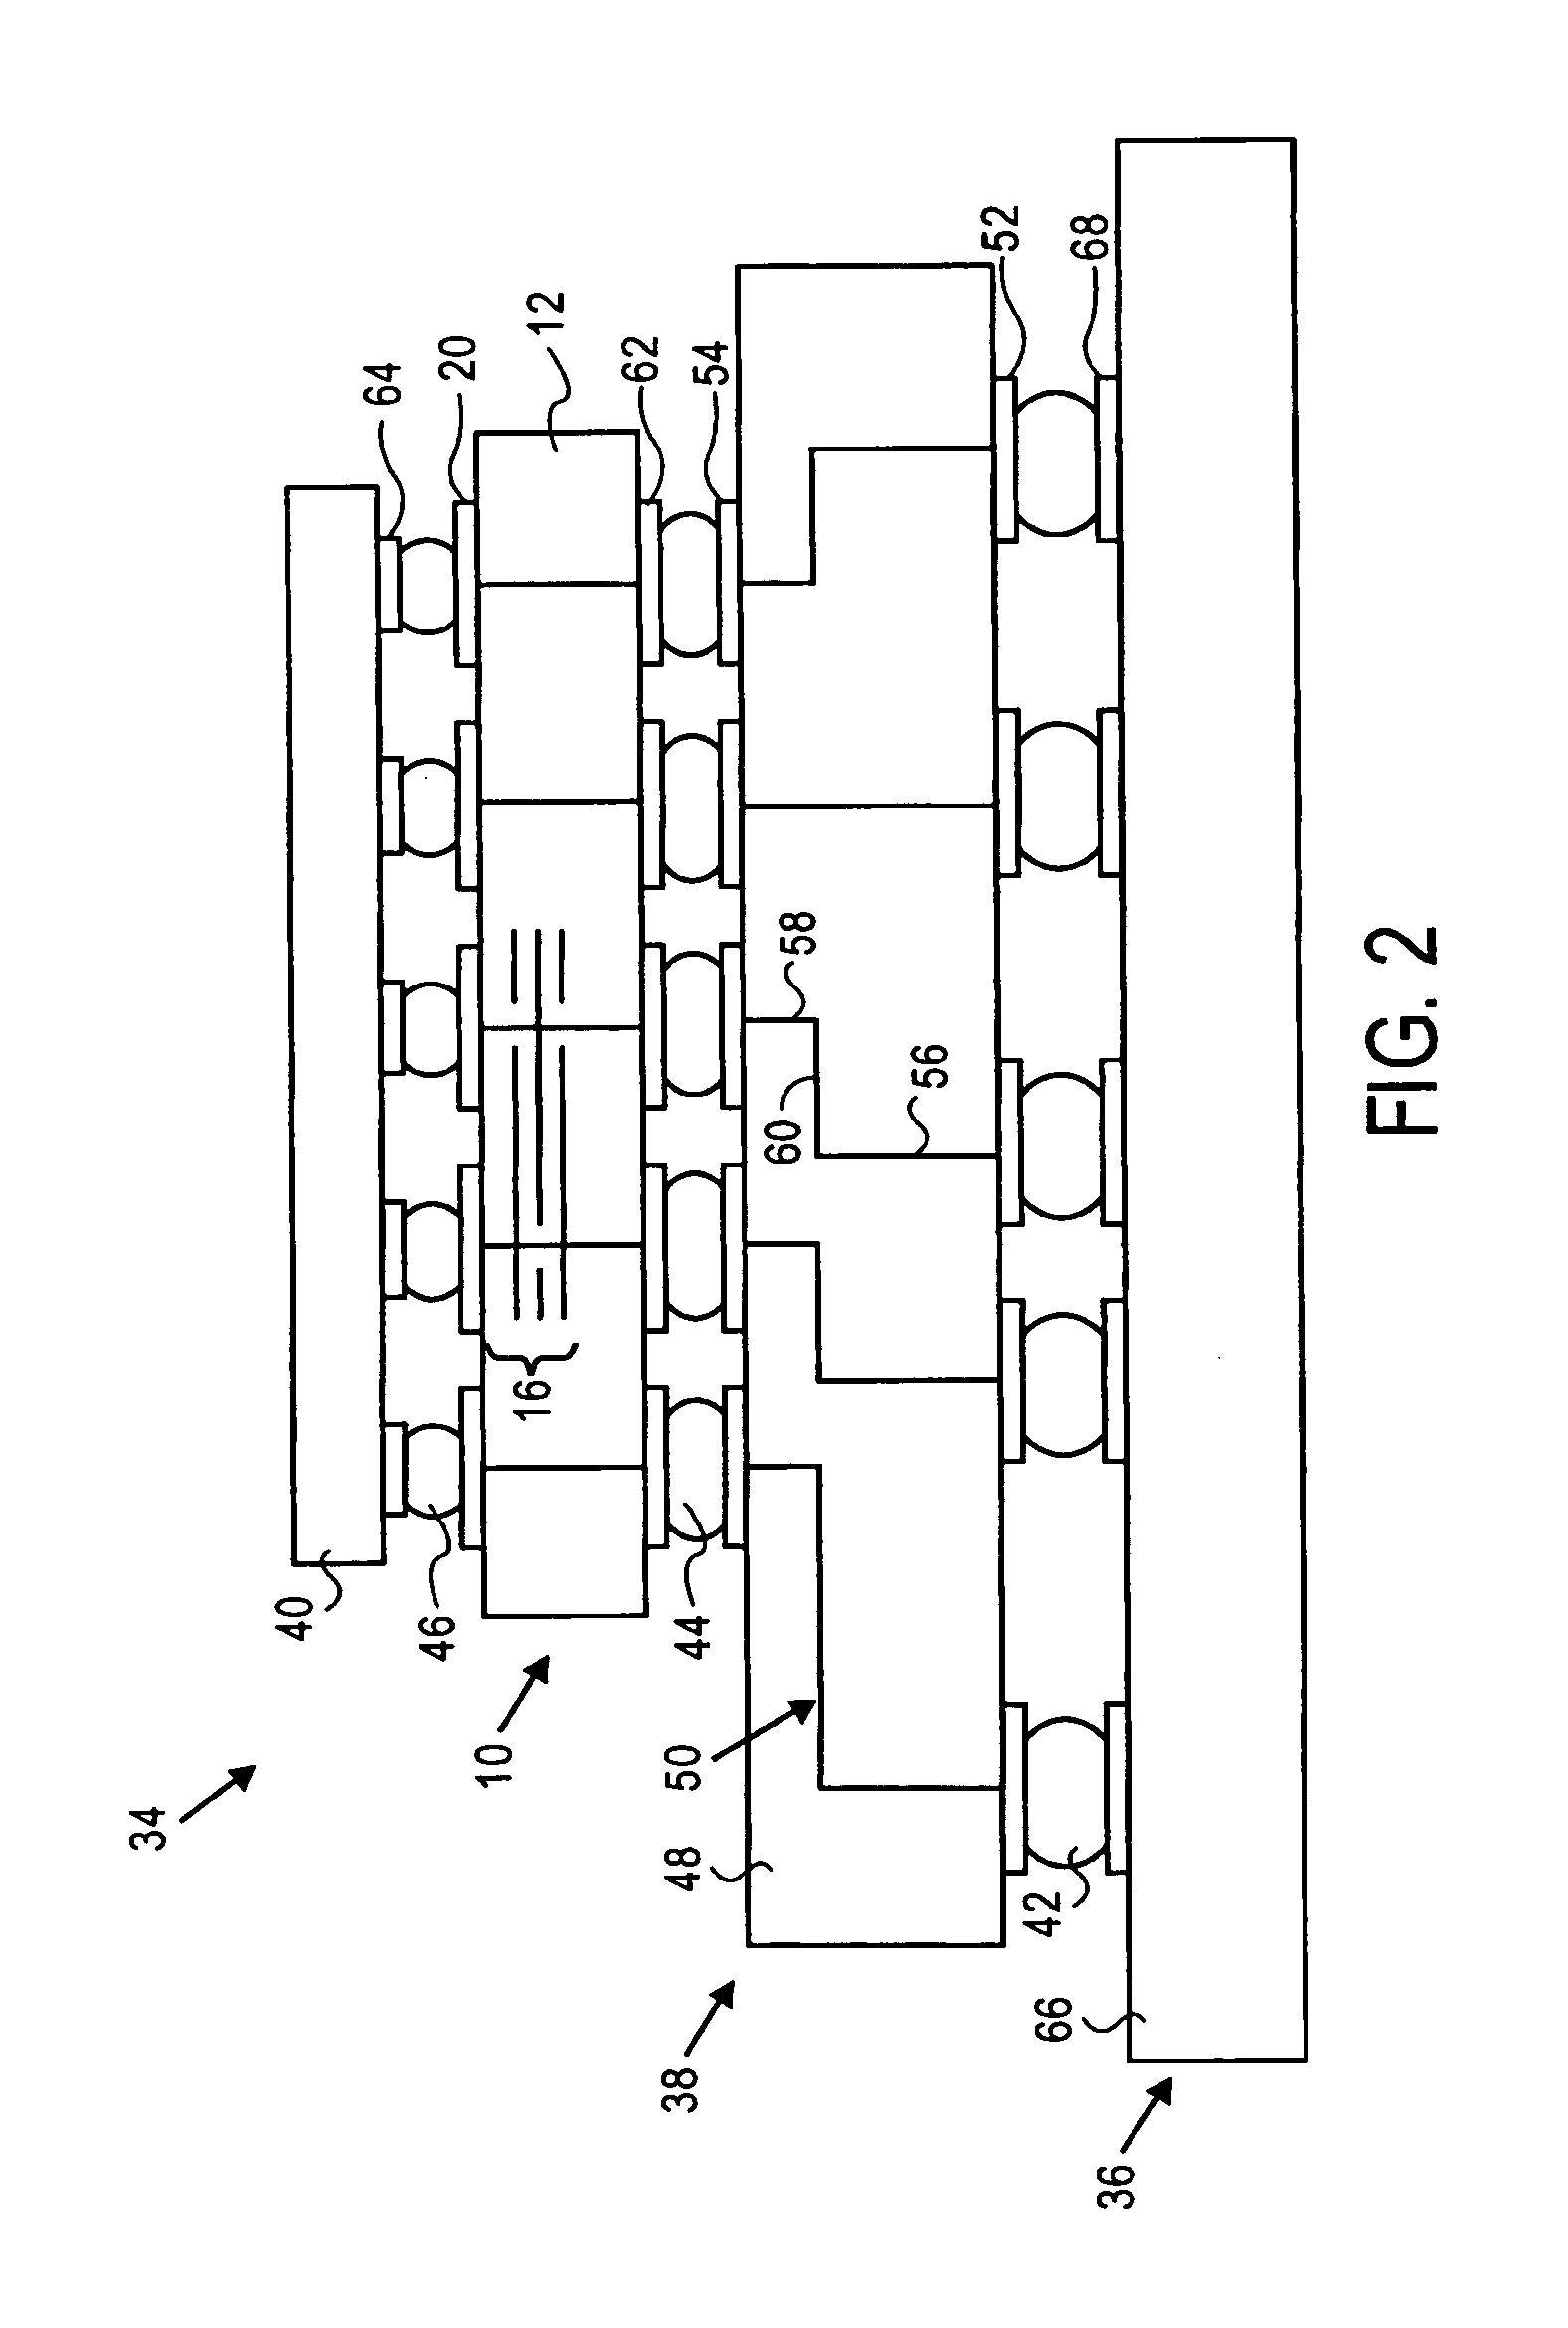 Integrated circuit package substrate having a thin film capacitor structure